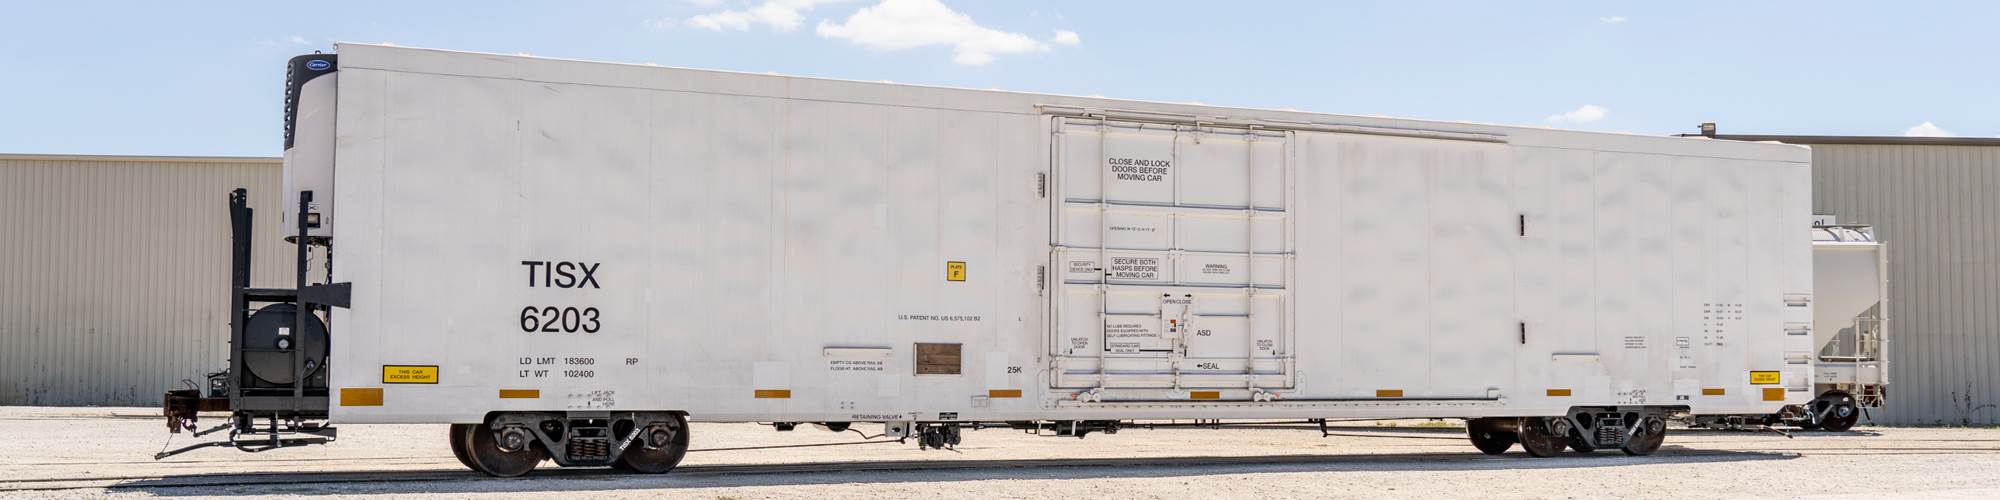 TrinityRail refrigerated railcar with composites load floor